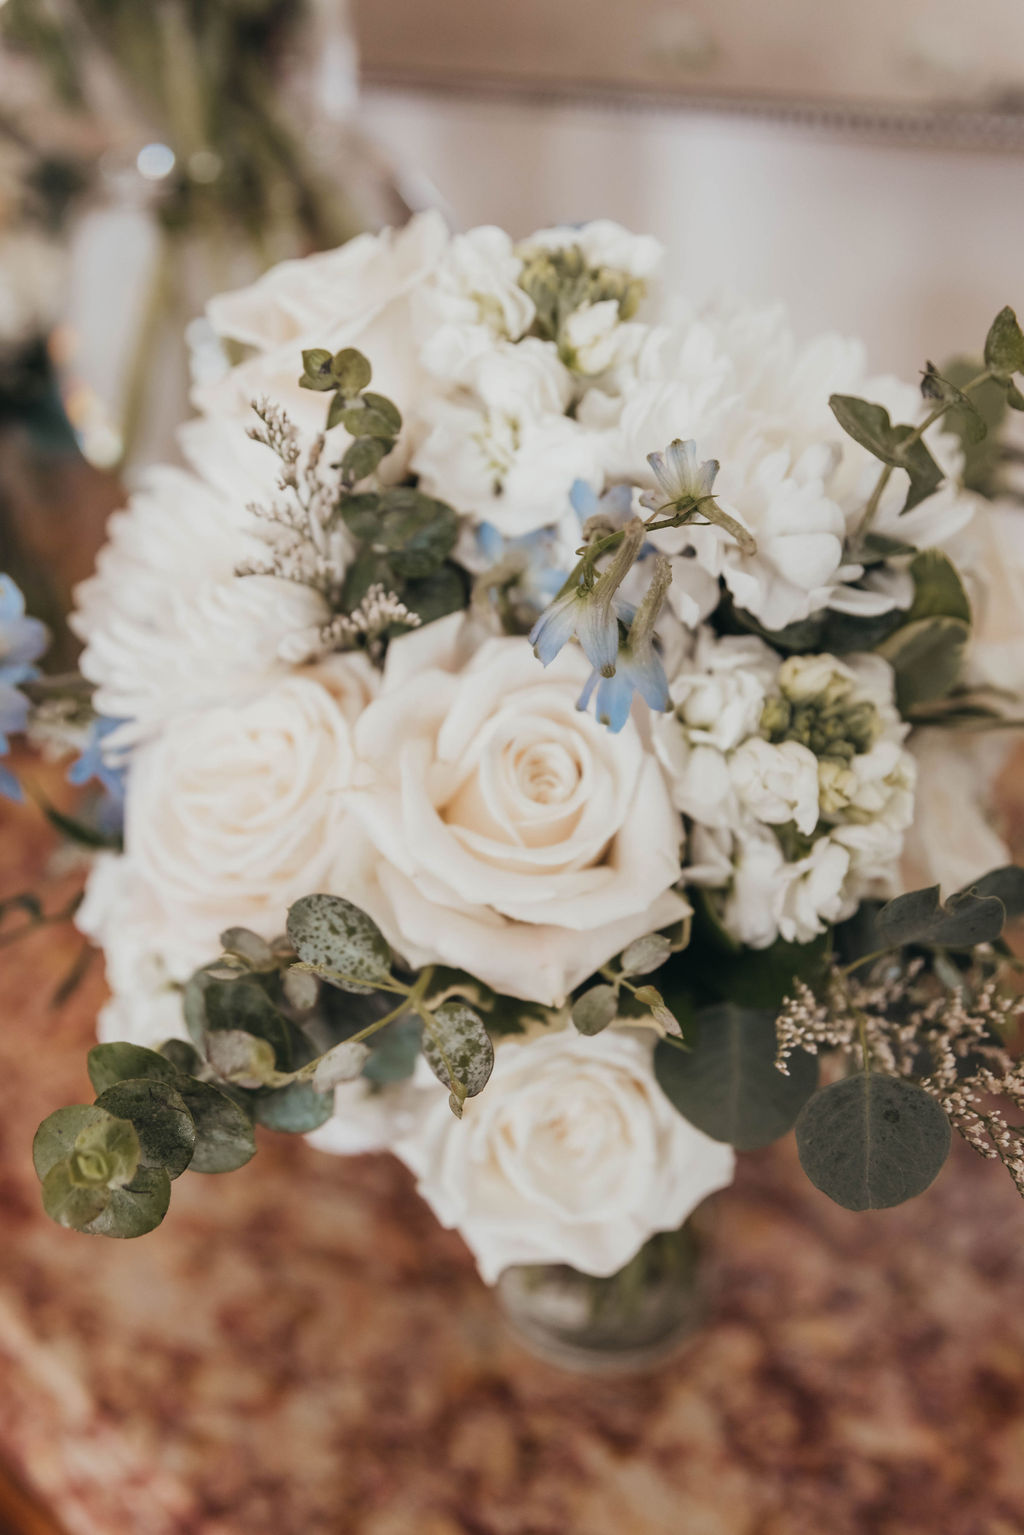 A bouquet of white roses and hydrangeas with greenery accents and a hint of blue flowers, artistically arranged on a table.